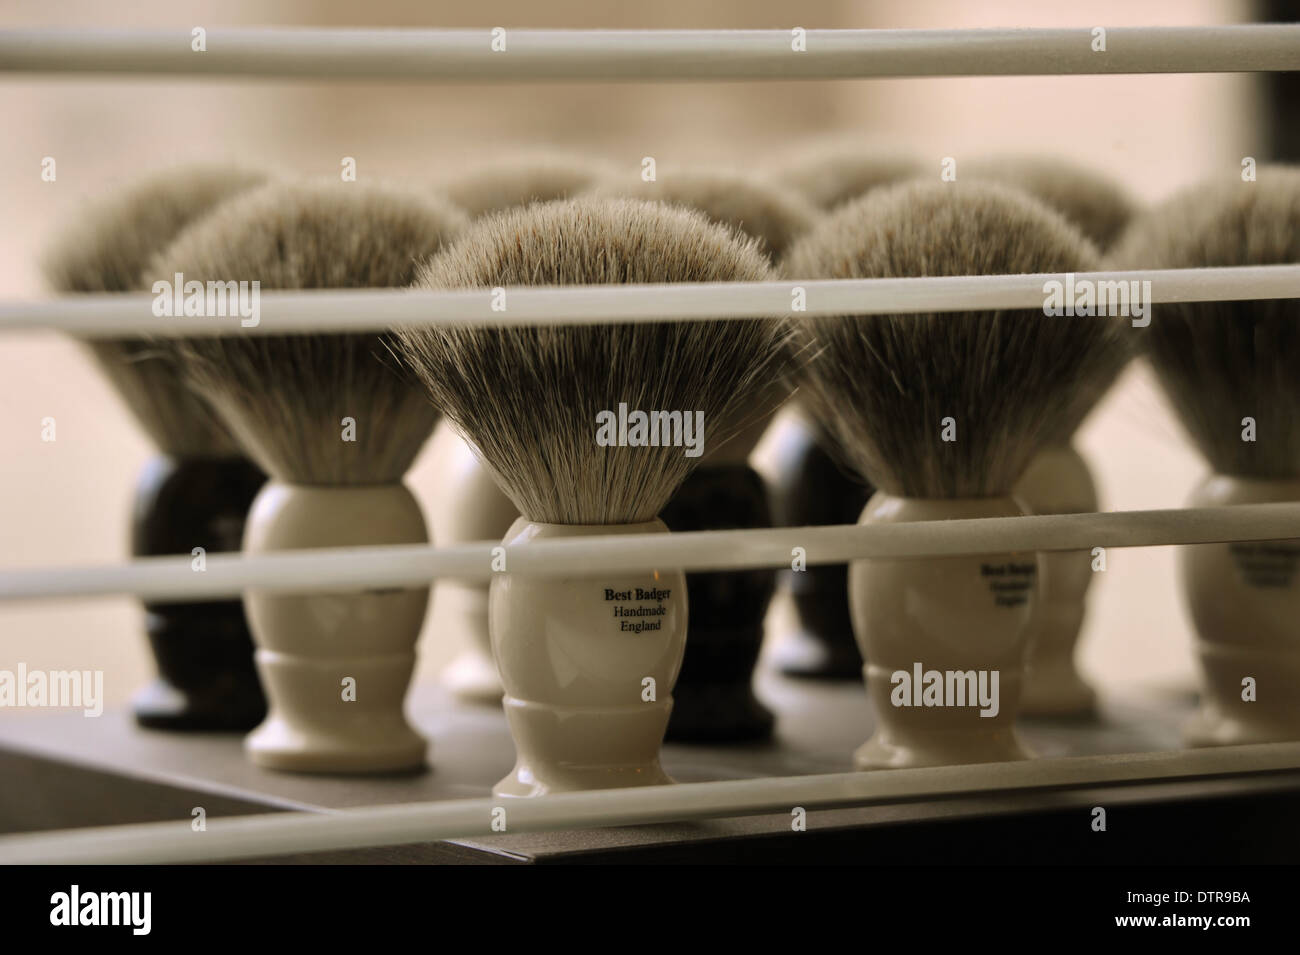 Shaving brushes, New York Barbershop, Rotterdam, Holland, Editorial use only. Stock Photo